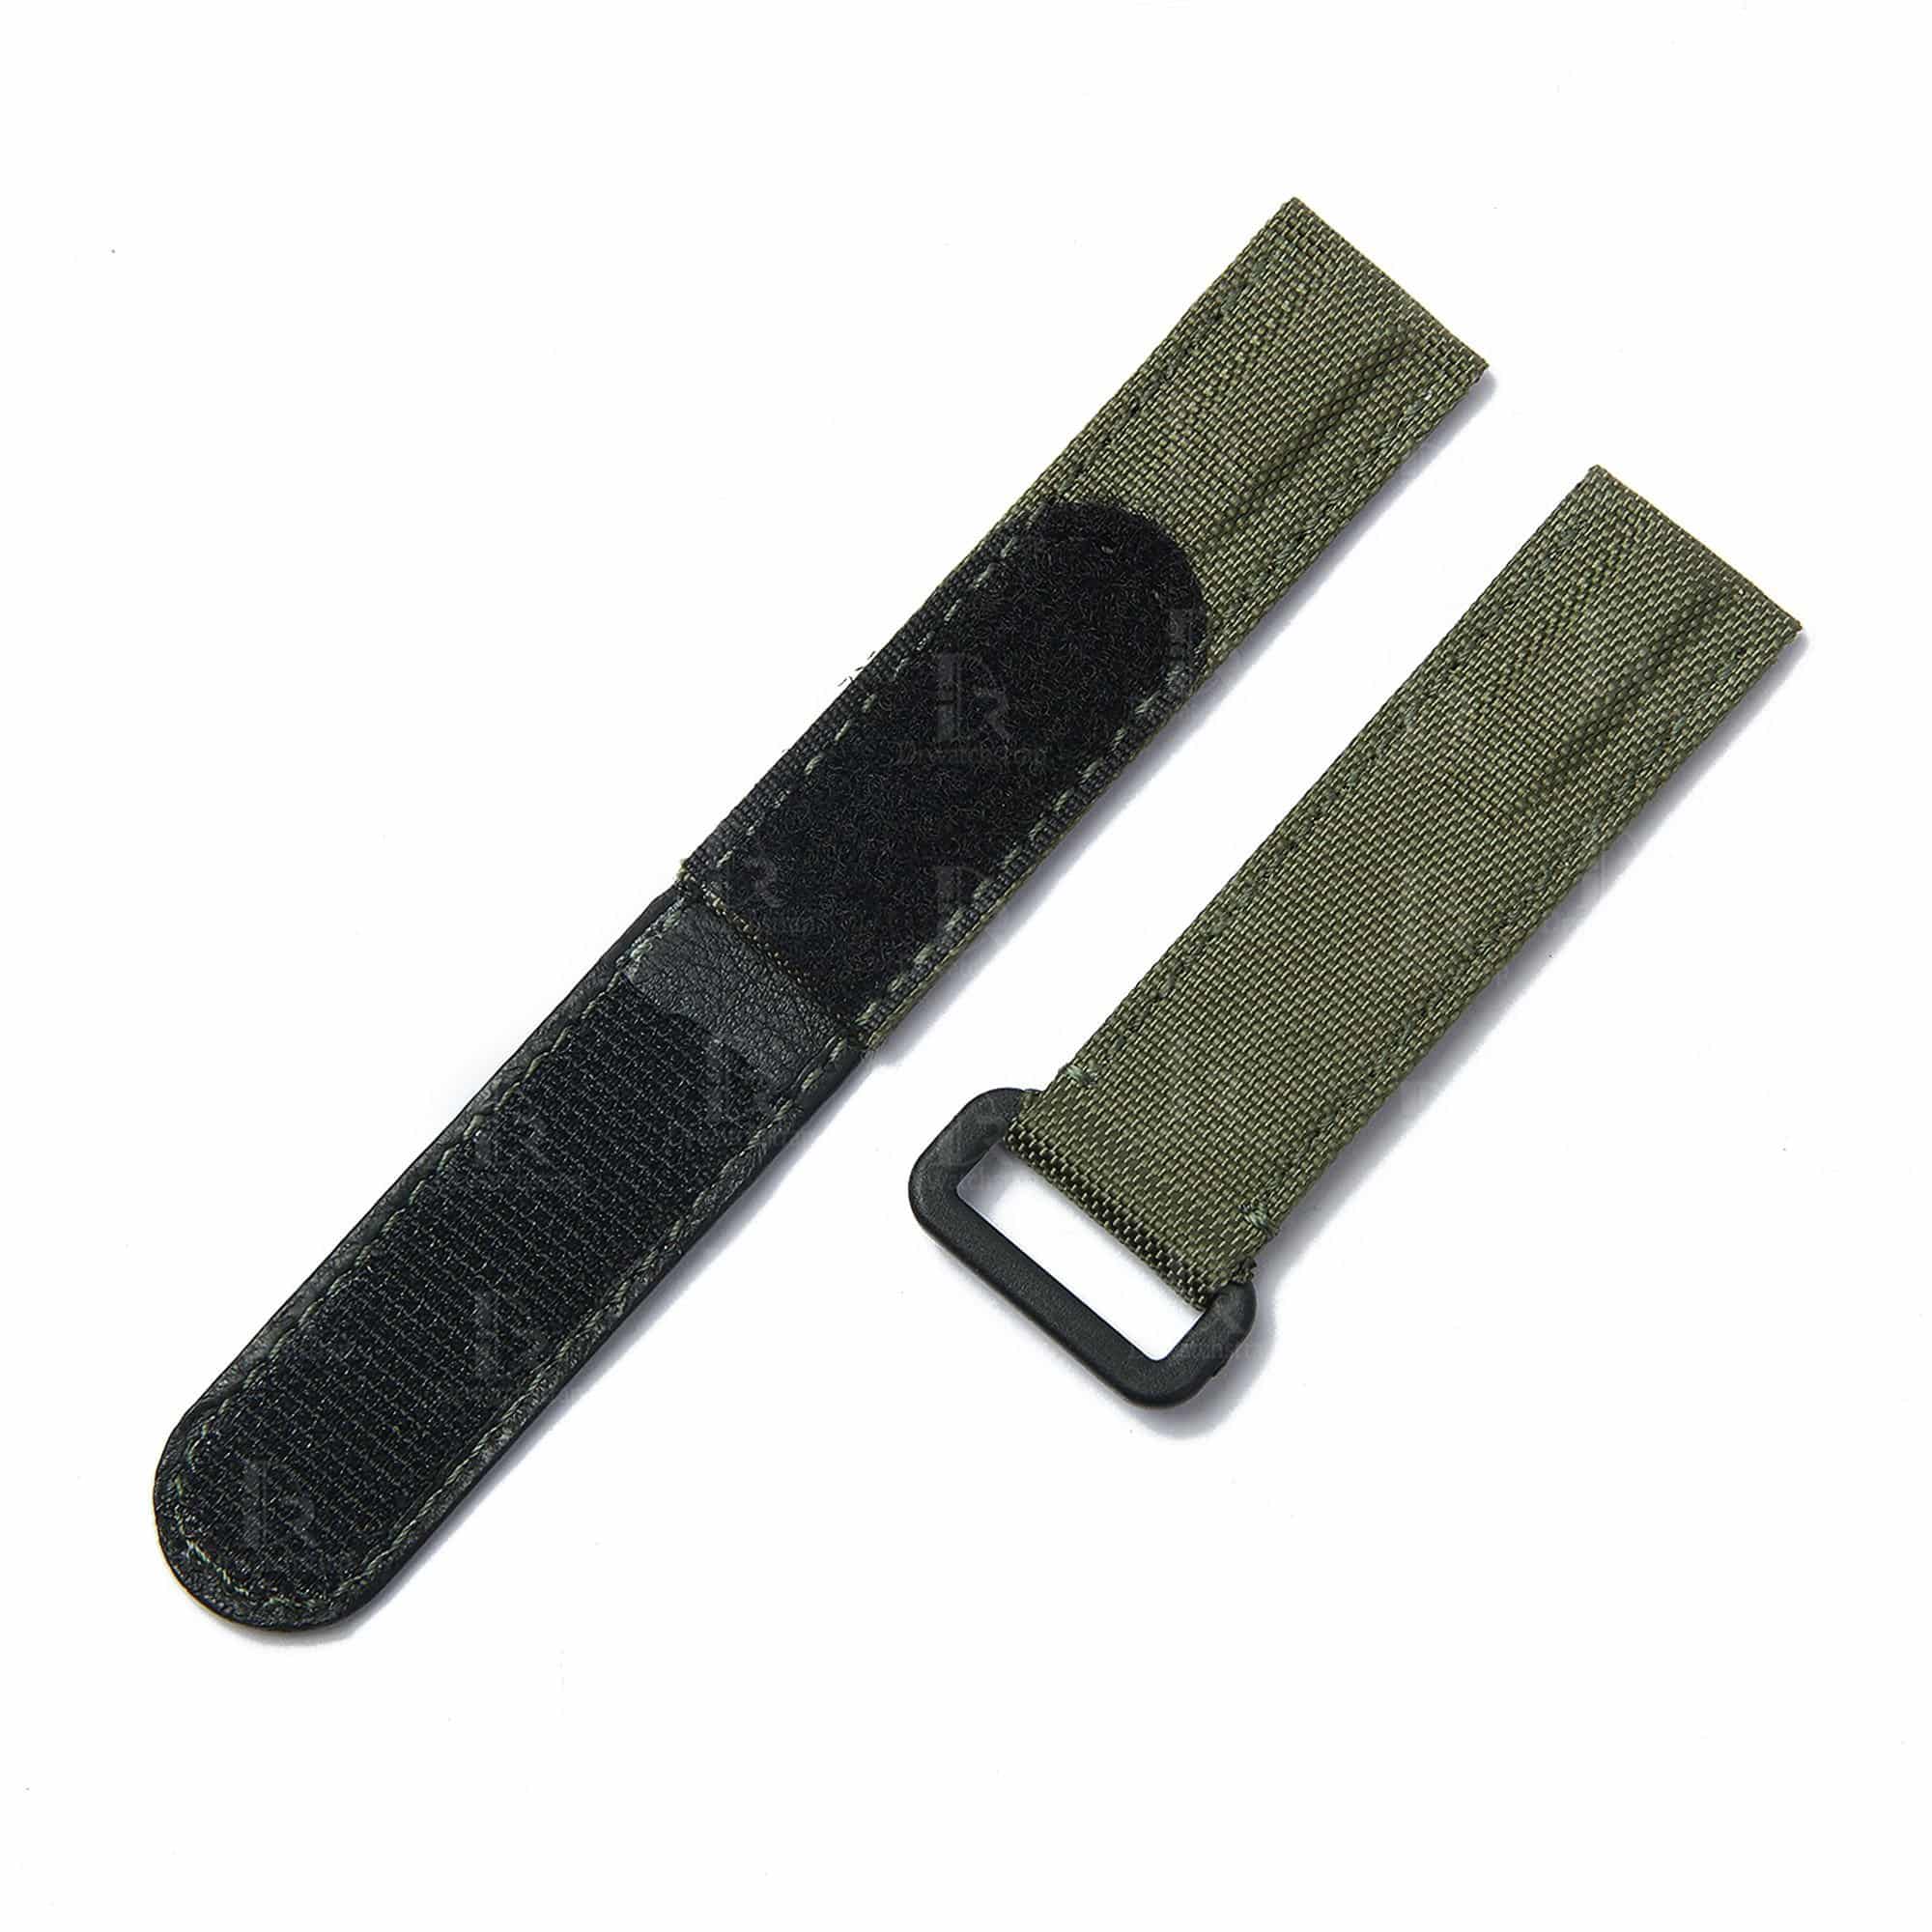 Rolex Velcro watch strap replacement 20mm canvas oliver green watch band for Rolex Omega Patek Philippe Blancpain sailcloth Canvas nylon straps online